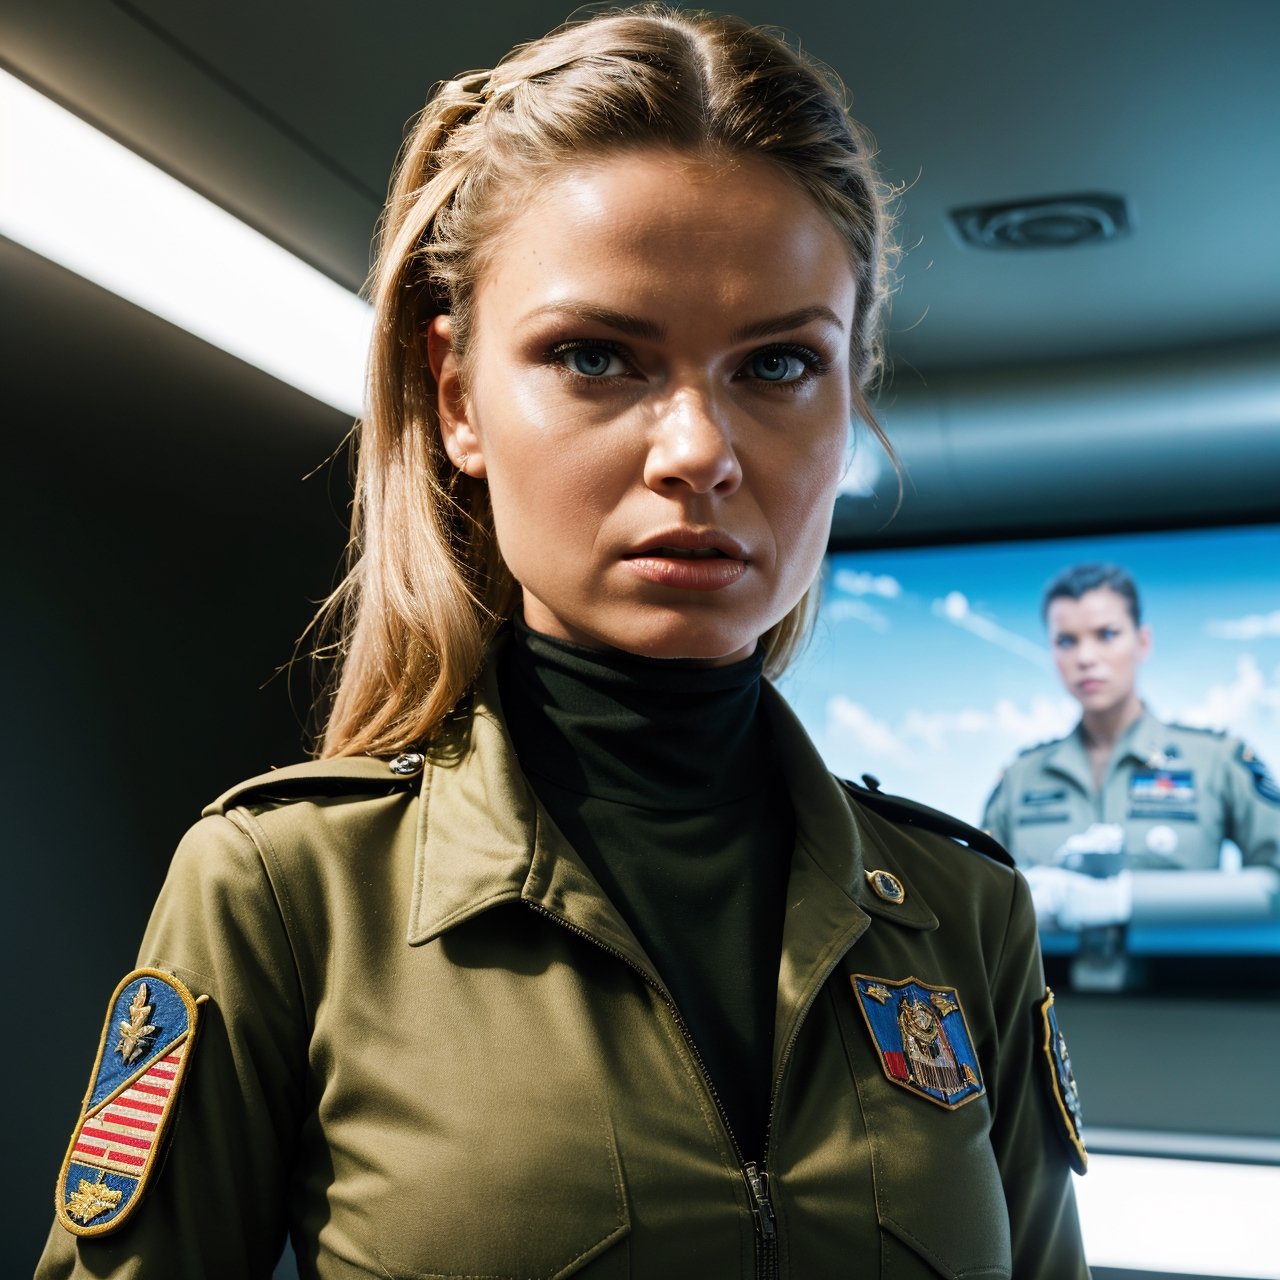 Movie Cover Image,Like a Real Person,Polite Dress,War War Fighter Action Cover Image),(Movie Reference Foundation : 1.8 ),Realistic,White Air Force General Uniform,(Realistic Face Resolution),Cinematic Poses,Adult,Skinny,Small,1 Woman with Dark Blonde Hair,Serious Face,Science Fiction,Sci-Fi,Different Characters